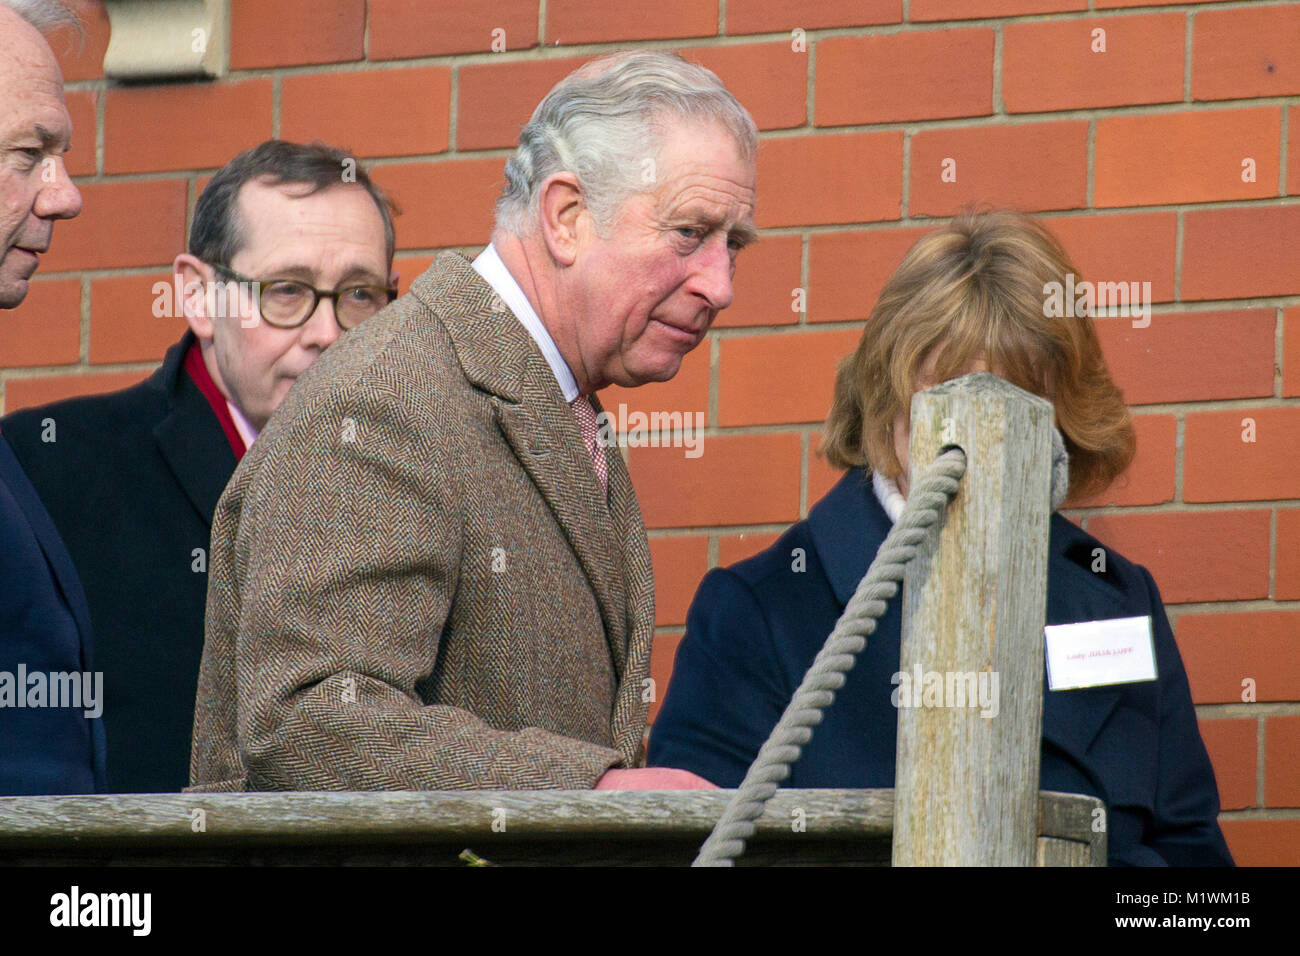 Stroud, Gloucestershire, UK. 2nd February, 2018. HRH The Prince of Wales arrives at Wallbridge Lock, Stroud, UK. Prince Charles visited to officially open the newly restored Wallbridge Lower Lock, part of the Cotswold Canals Project. Picture: Carl Hewlett/Alamy Live News Stock Photo